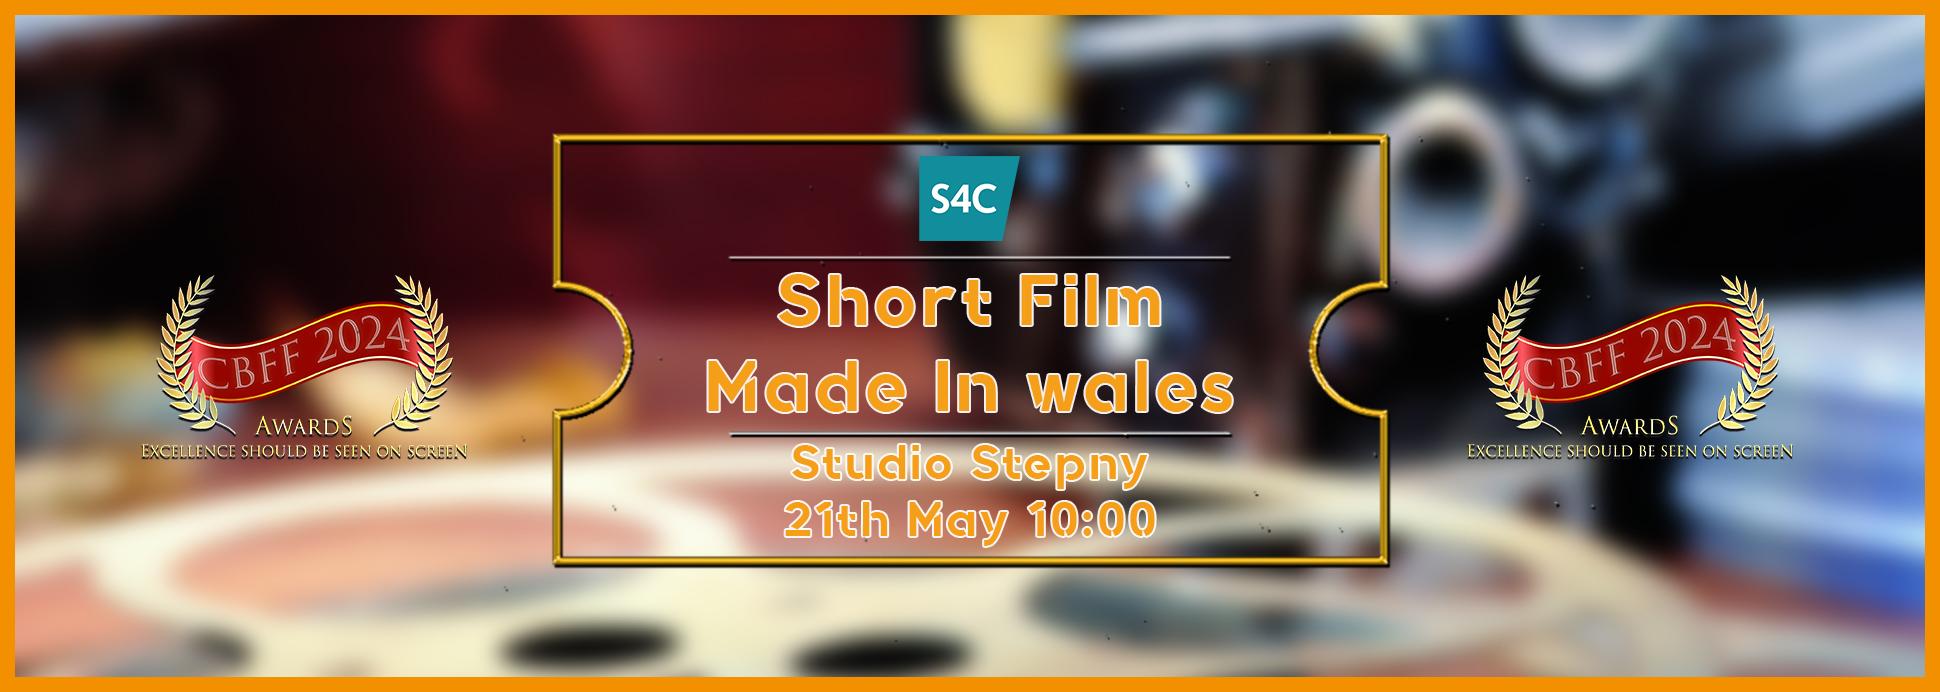 Tuesday 21st 10:00 Studio Stepny Short Film Made In Wales